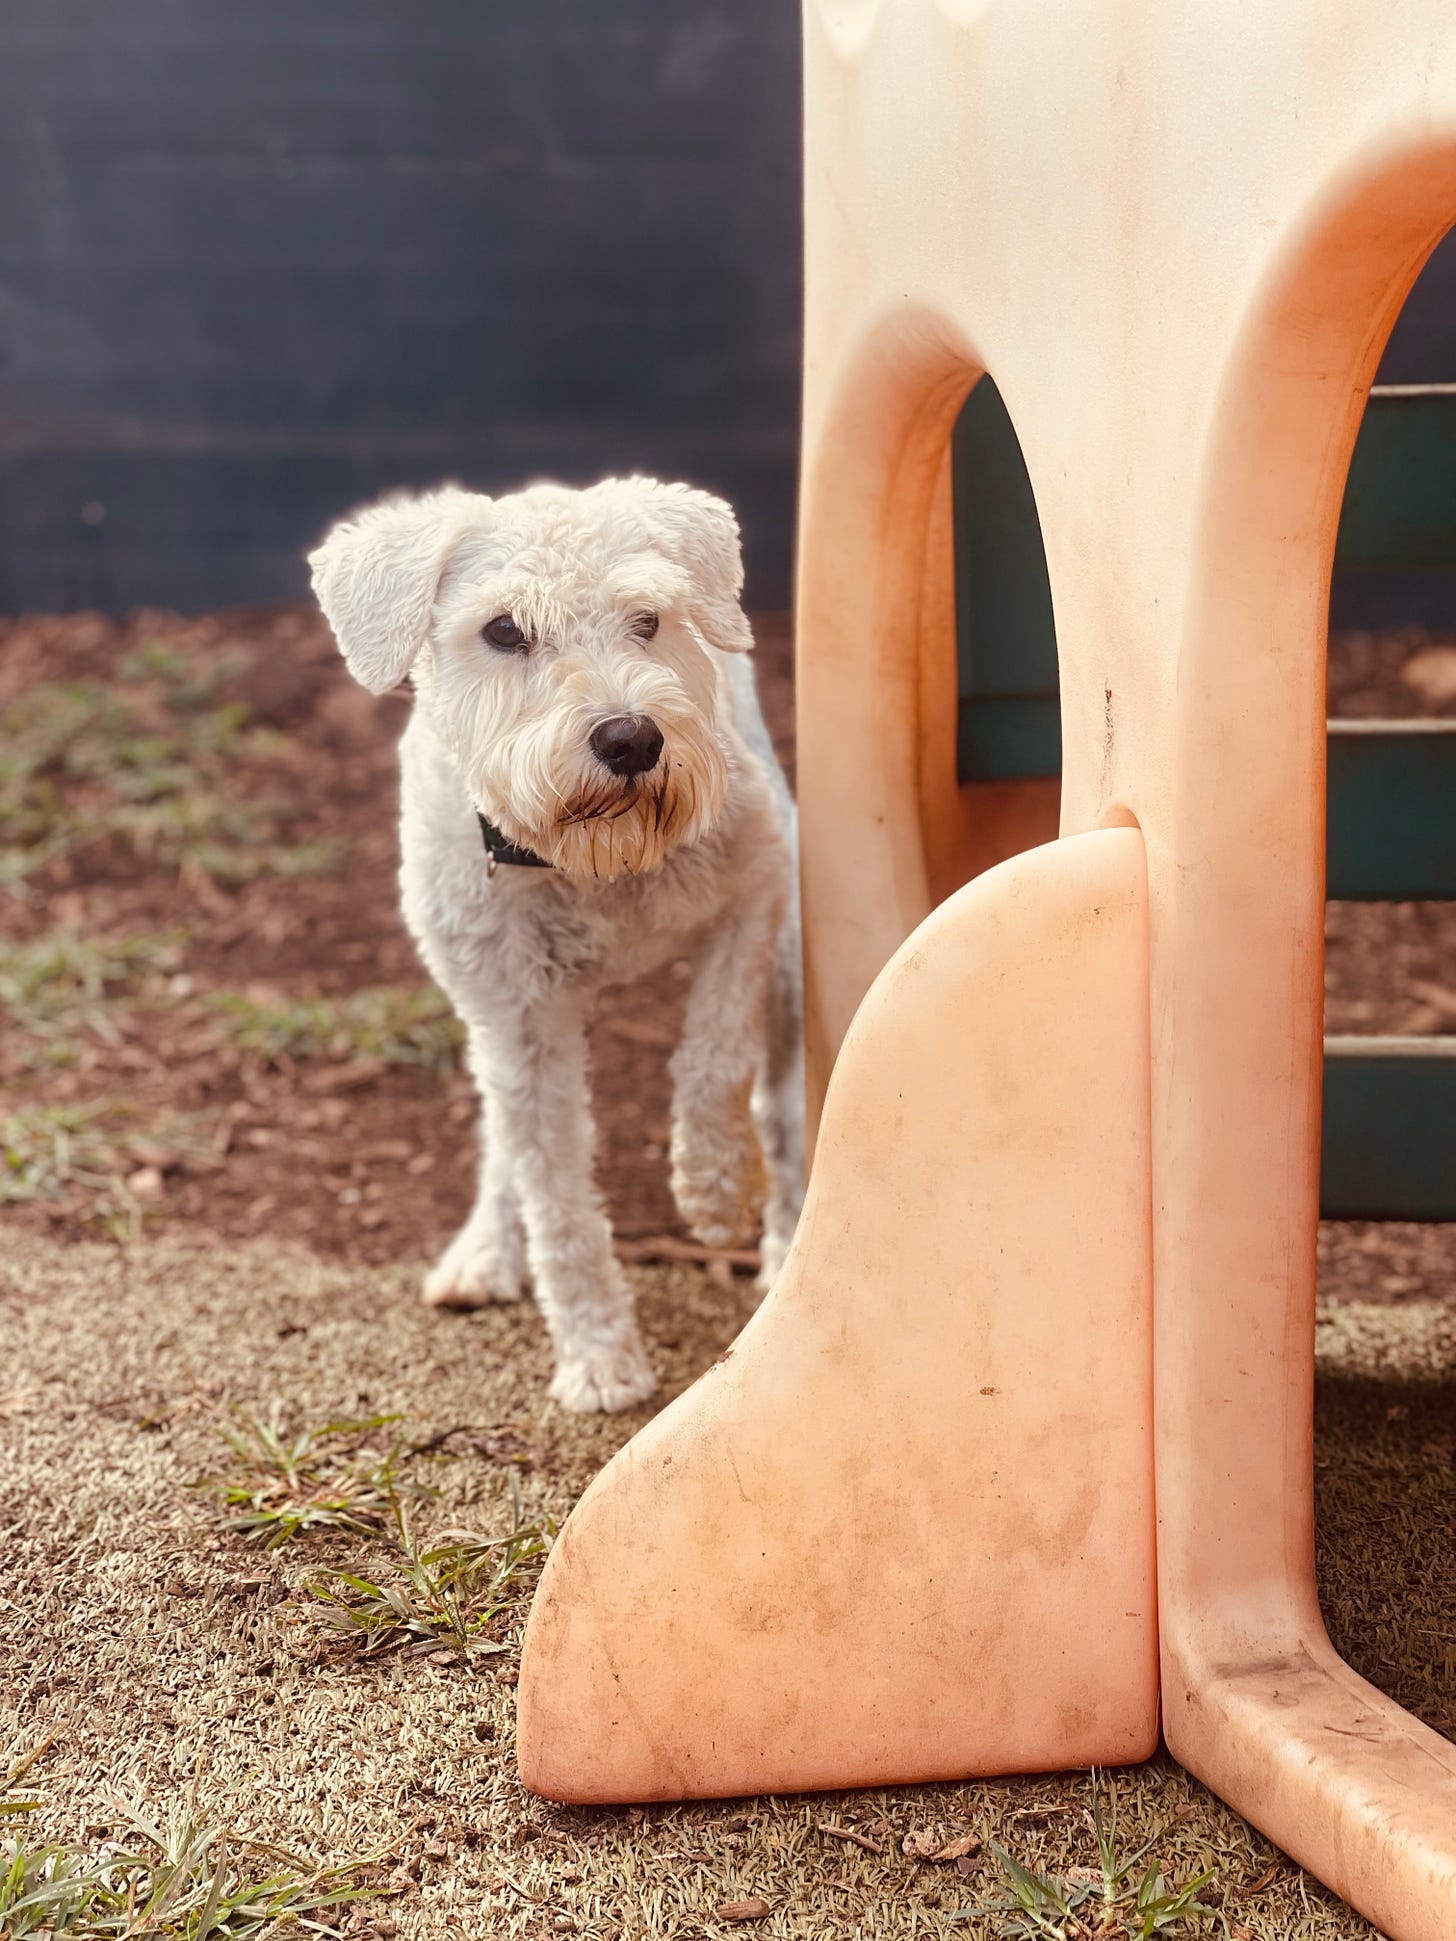 Finn, a white schnauzer, stands beside a plastic play structure. He raises one paw, as if he is about to take a step.